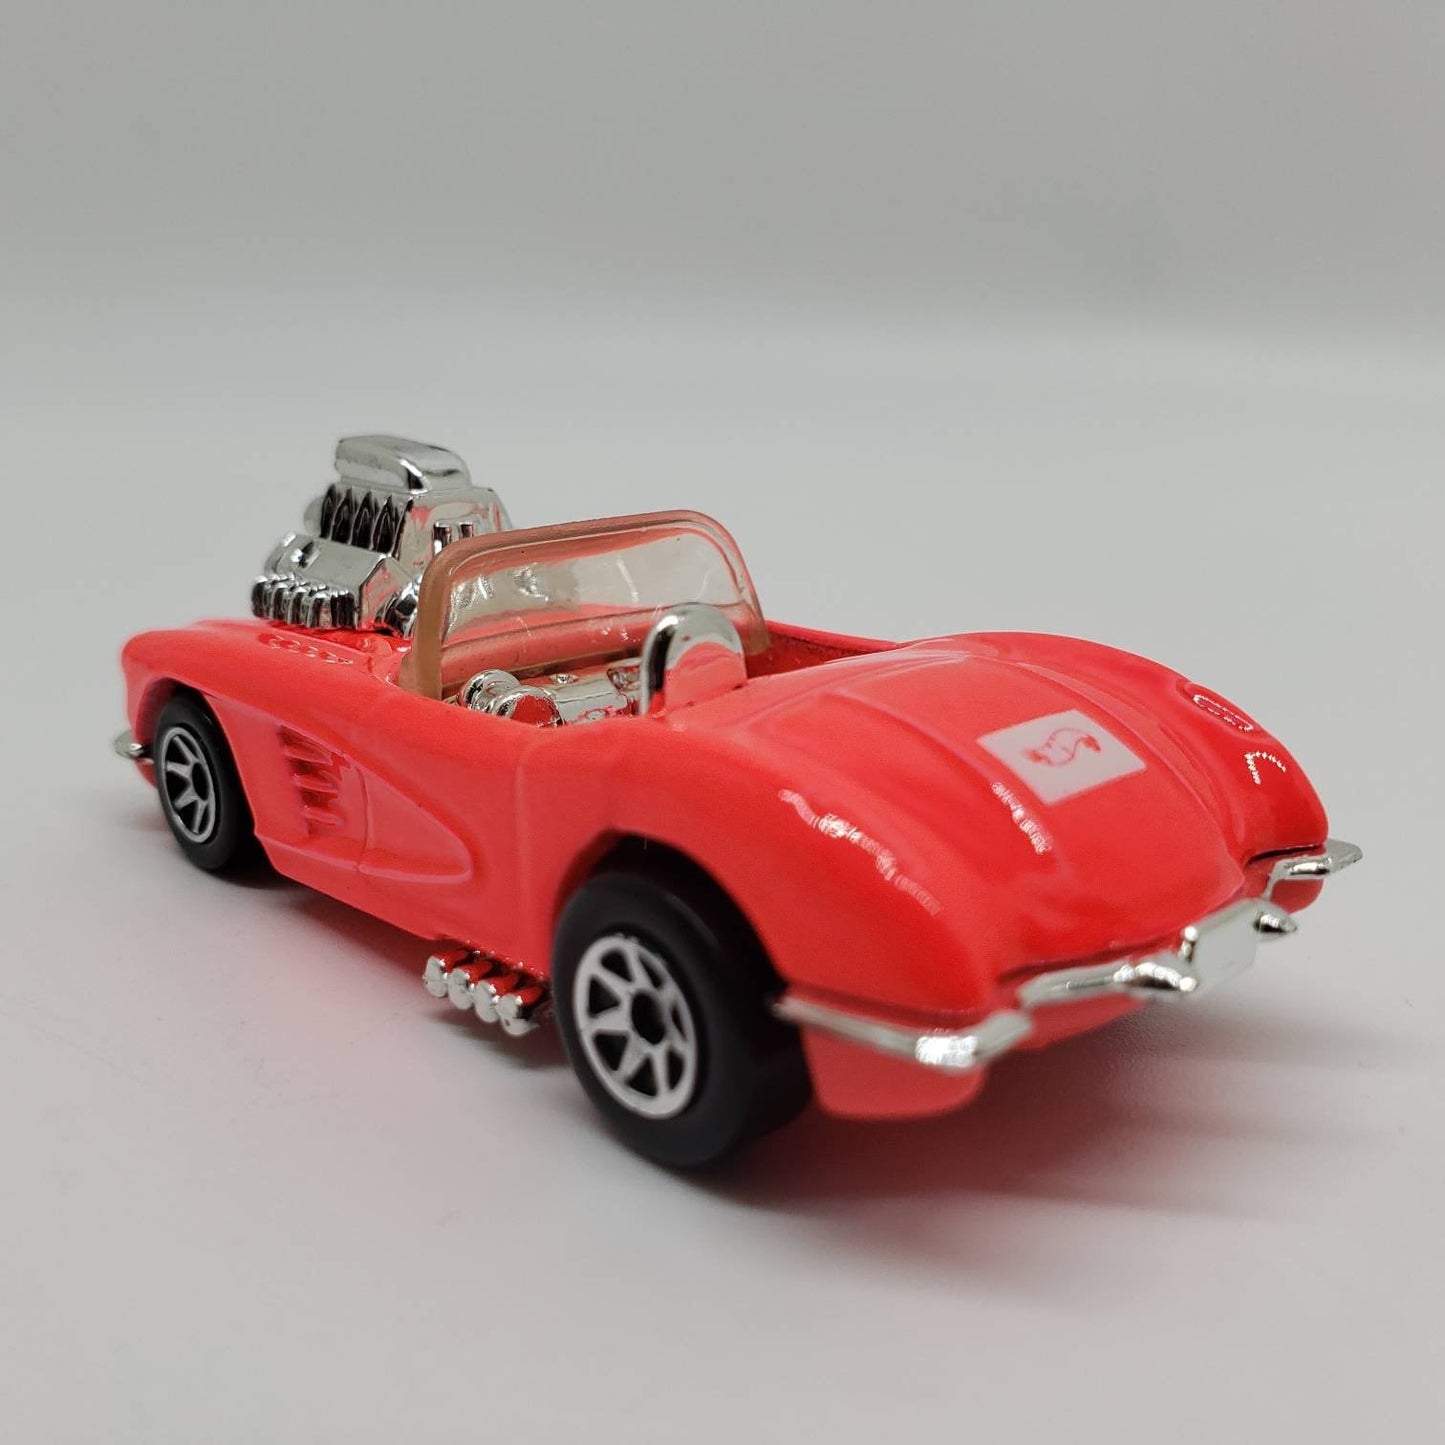 Hot Wheels '58 Corvette Coupe Hot Pink 1995 Models Series Perfect Birthday Gift Miniature Collectable Scale Model Toy Car